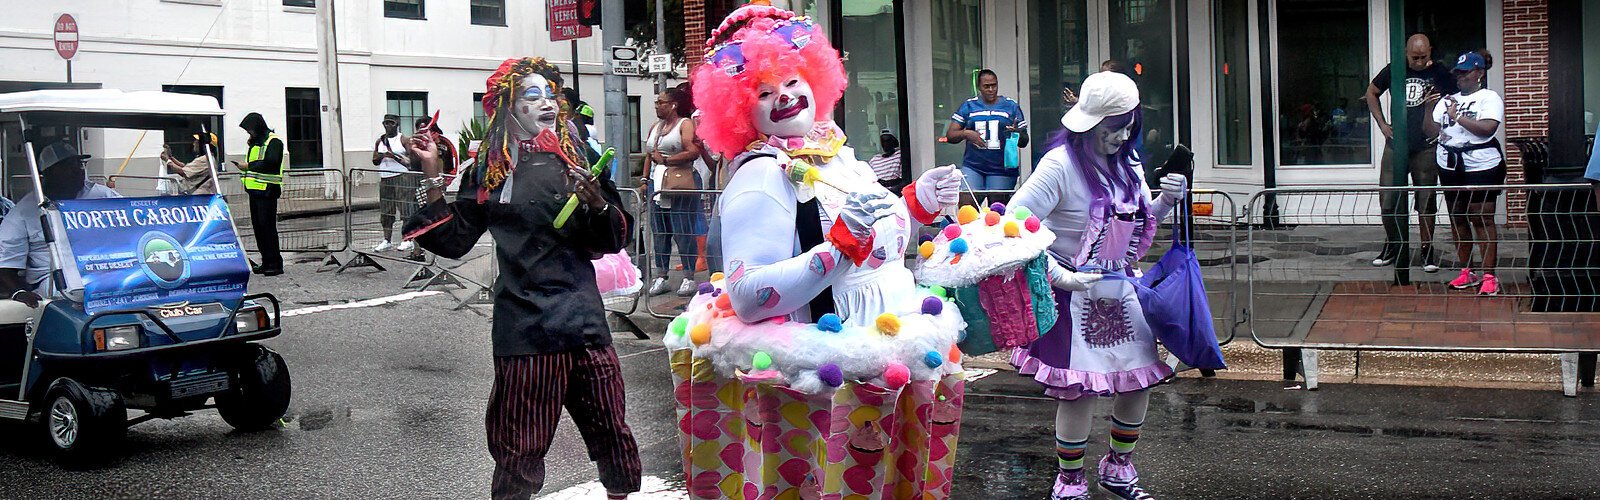 Clowns are the visible ambassadors of the shrine organization and promote fun, fellowship and entertainment with their silly antics and camaraderie.